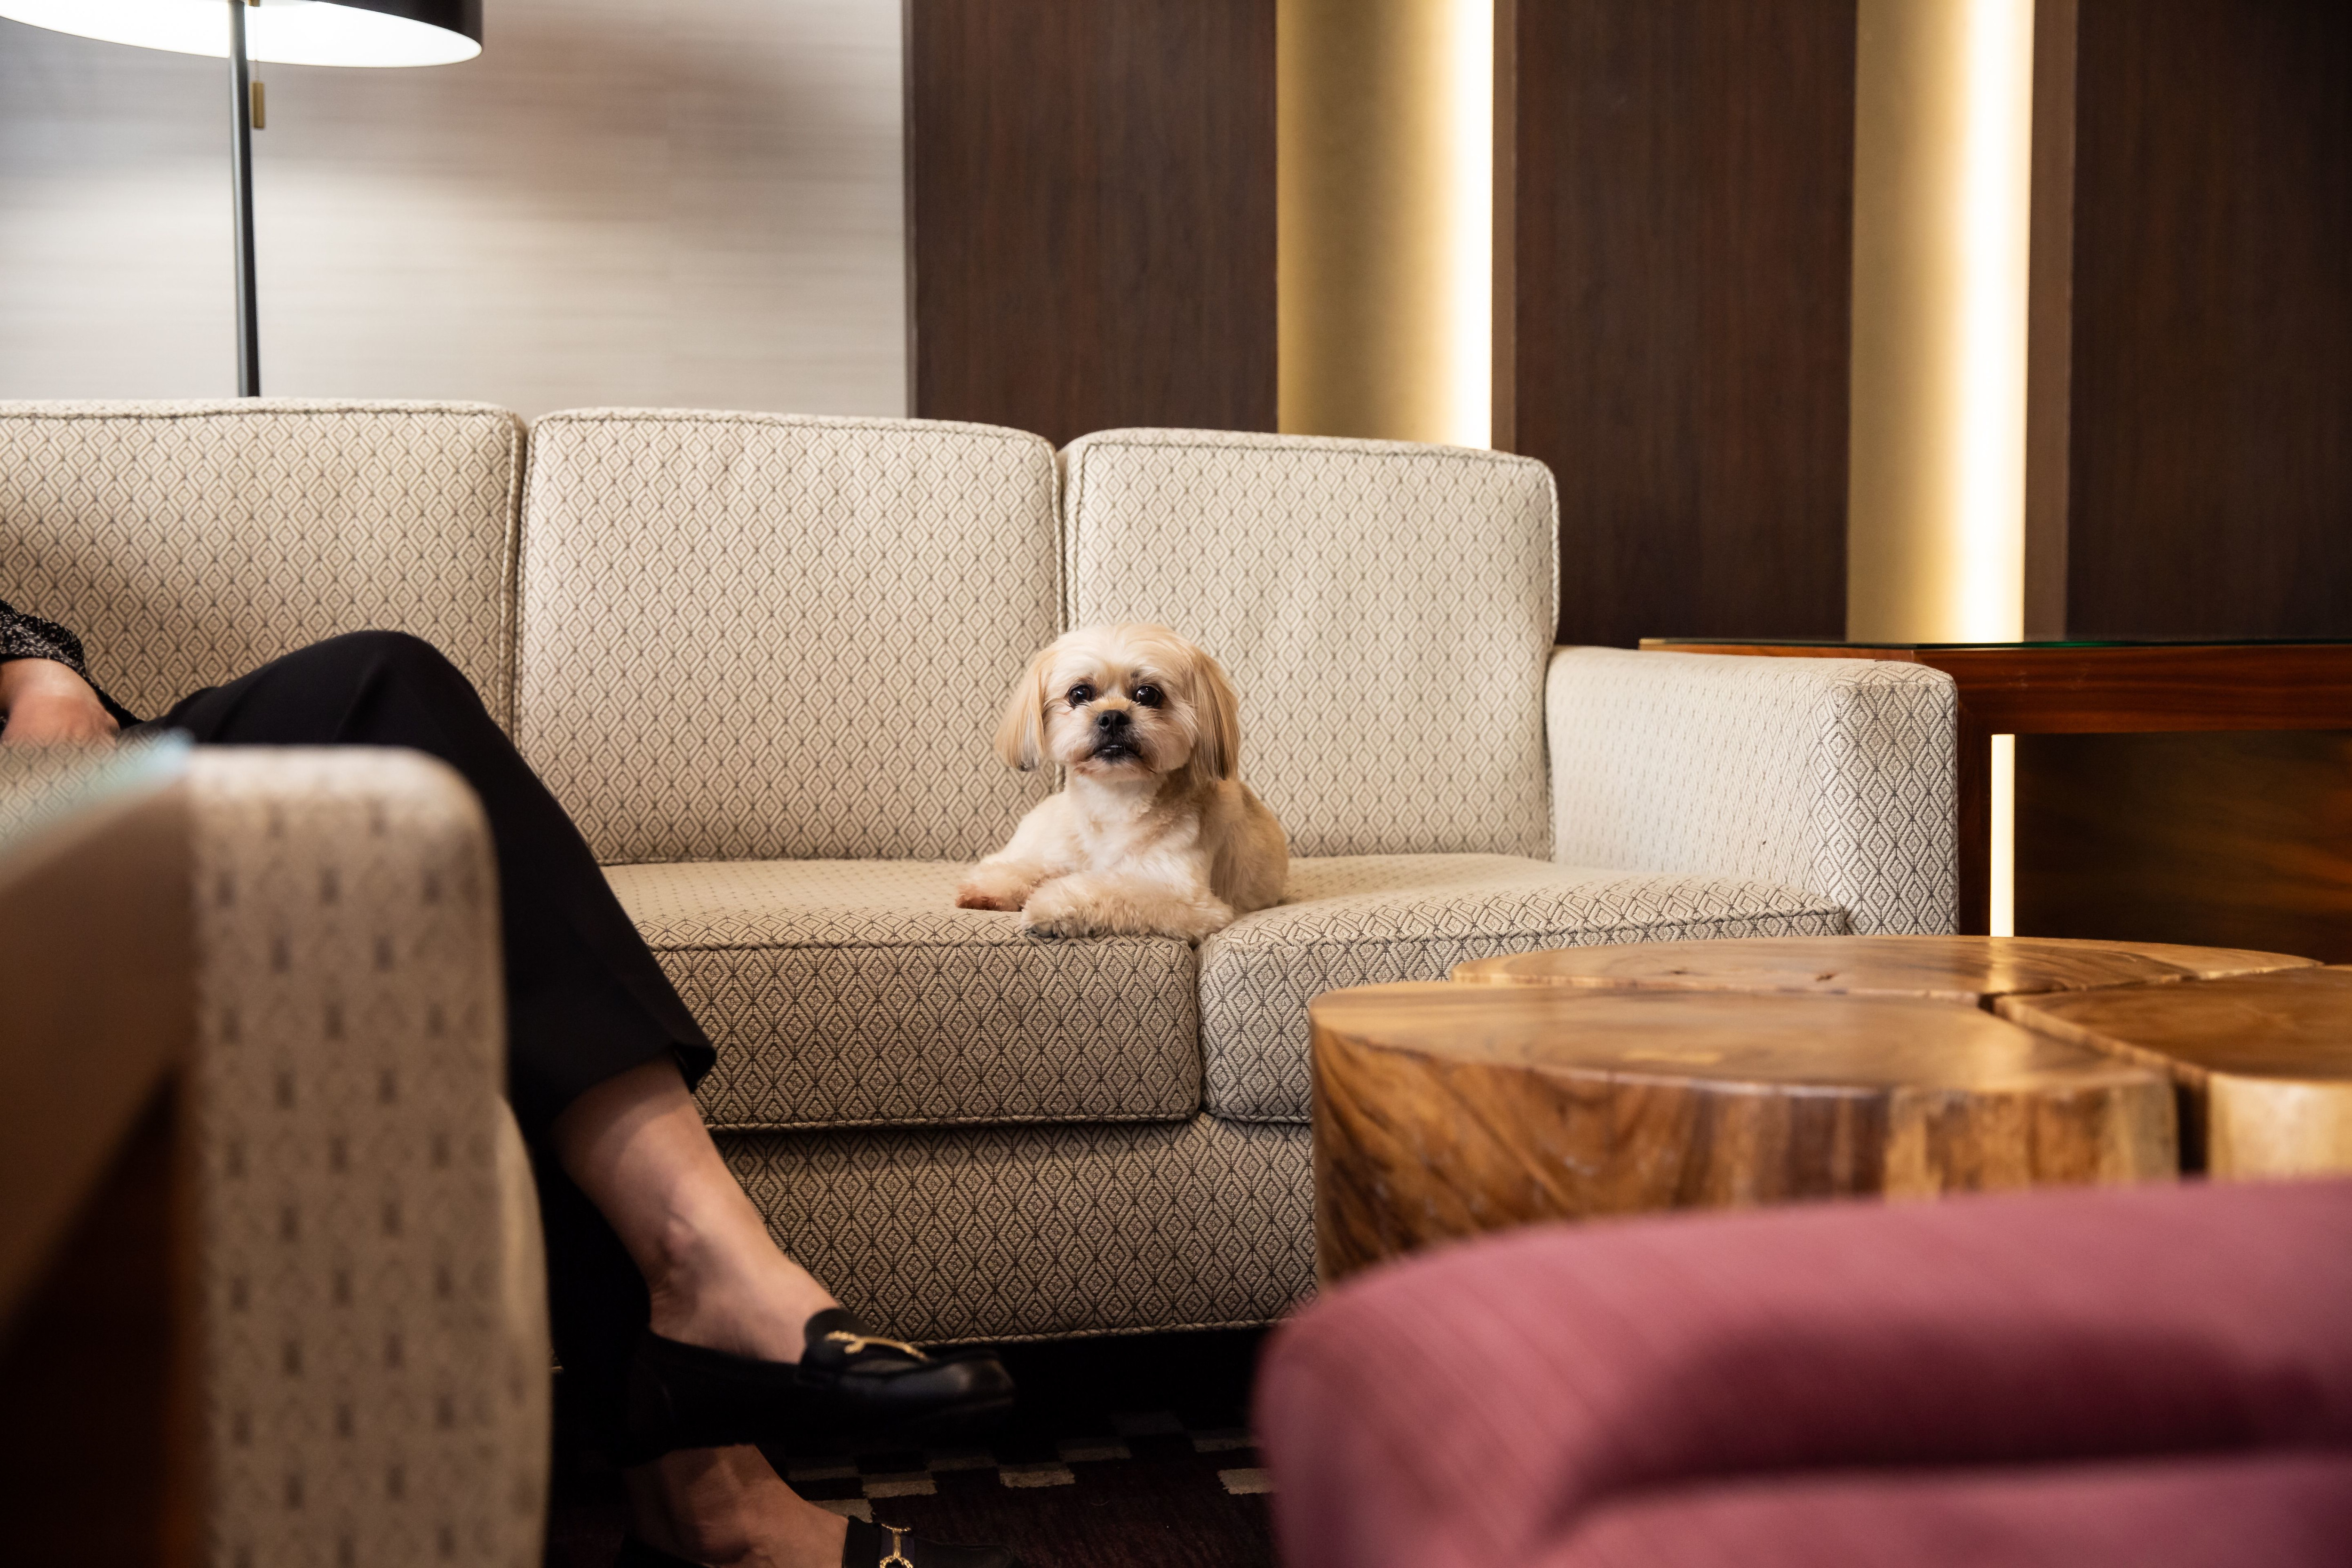 Dog relaxing in sitting area with owner